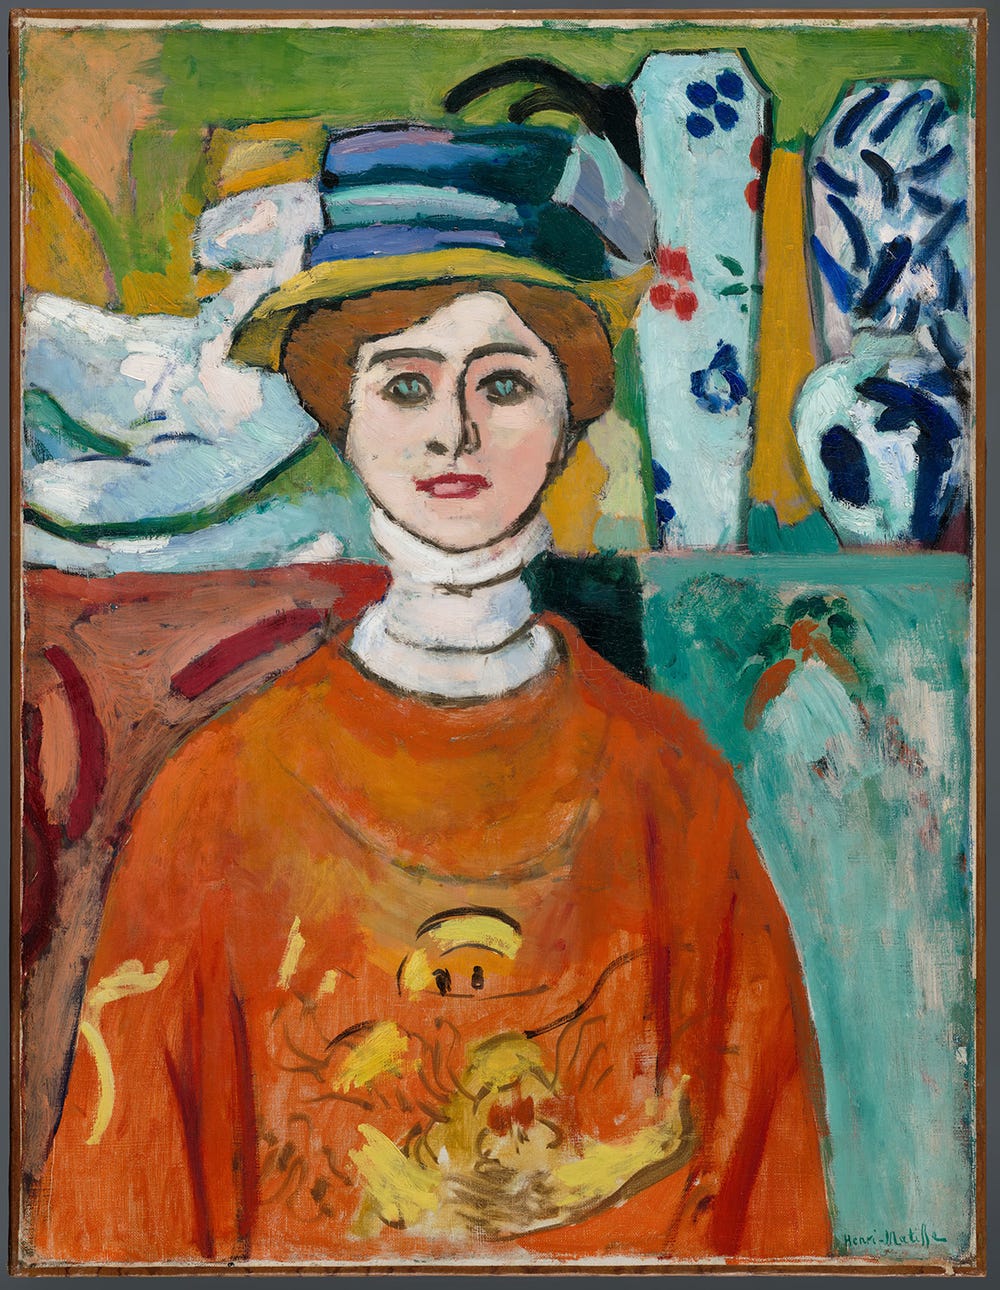 Painting of woman wearing orange sweater and blue and green hat.